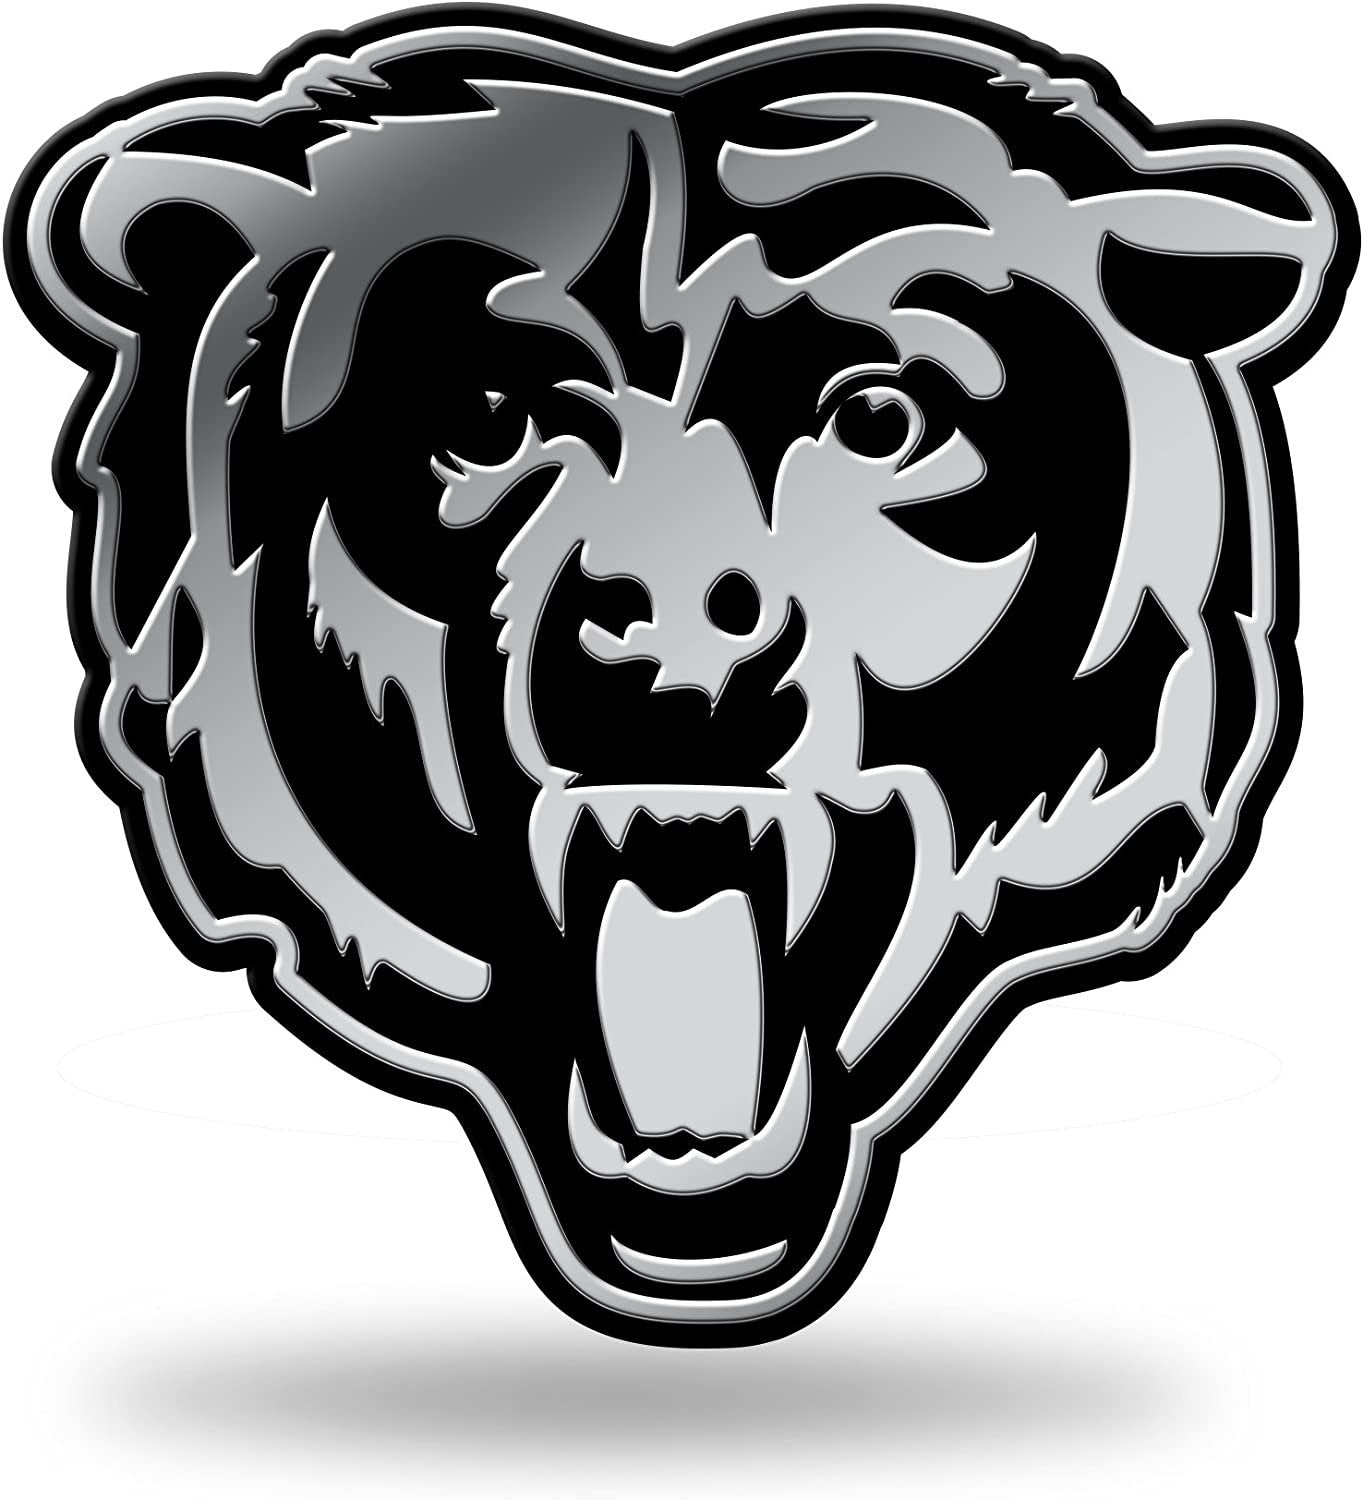 Chicago Bears Auto Emblem, Silver Chrome Color, Raised Molded Plastic, 3.5 Inch, Adhesive Tape Backing